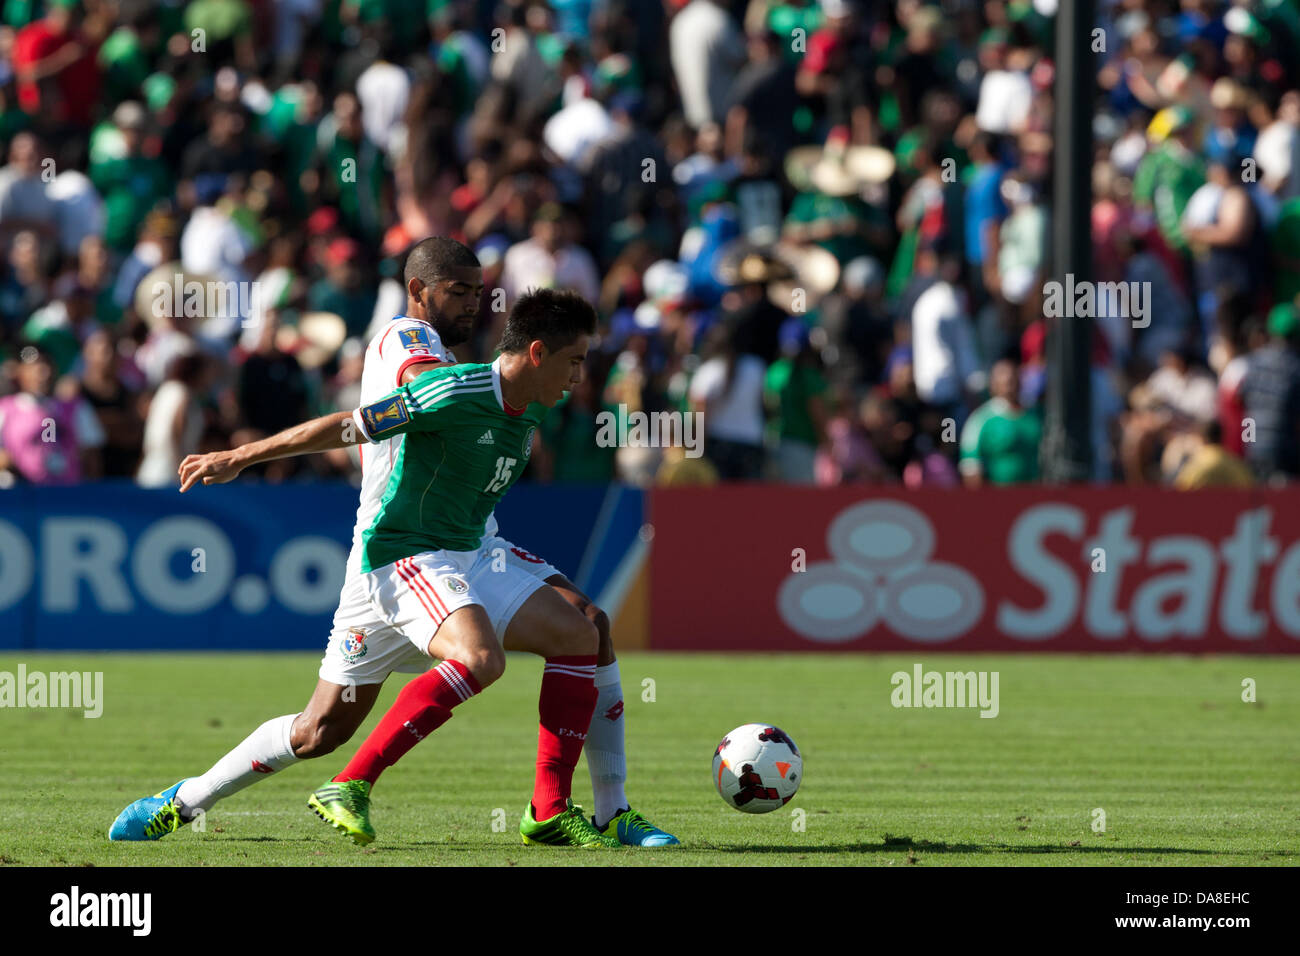 Pasadena, California, USA. 7th July, 2013. Efrain Velarde #15 of Mexico and Gabriel Gomez #6 of Panama during the 2013 CONCACAF Gold Cup game between Mexico and Panama on July 7, 2013 at the Rose Bowl in Pasadena, Ca. Credit:  Brandon Parry / Newsport/Alamy Live News Stock Photo